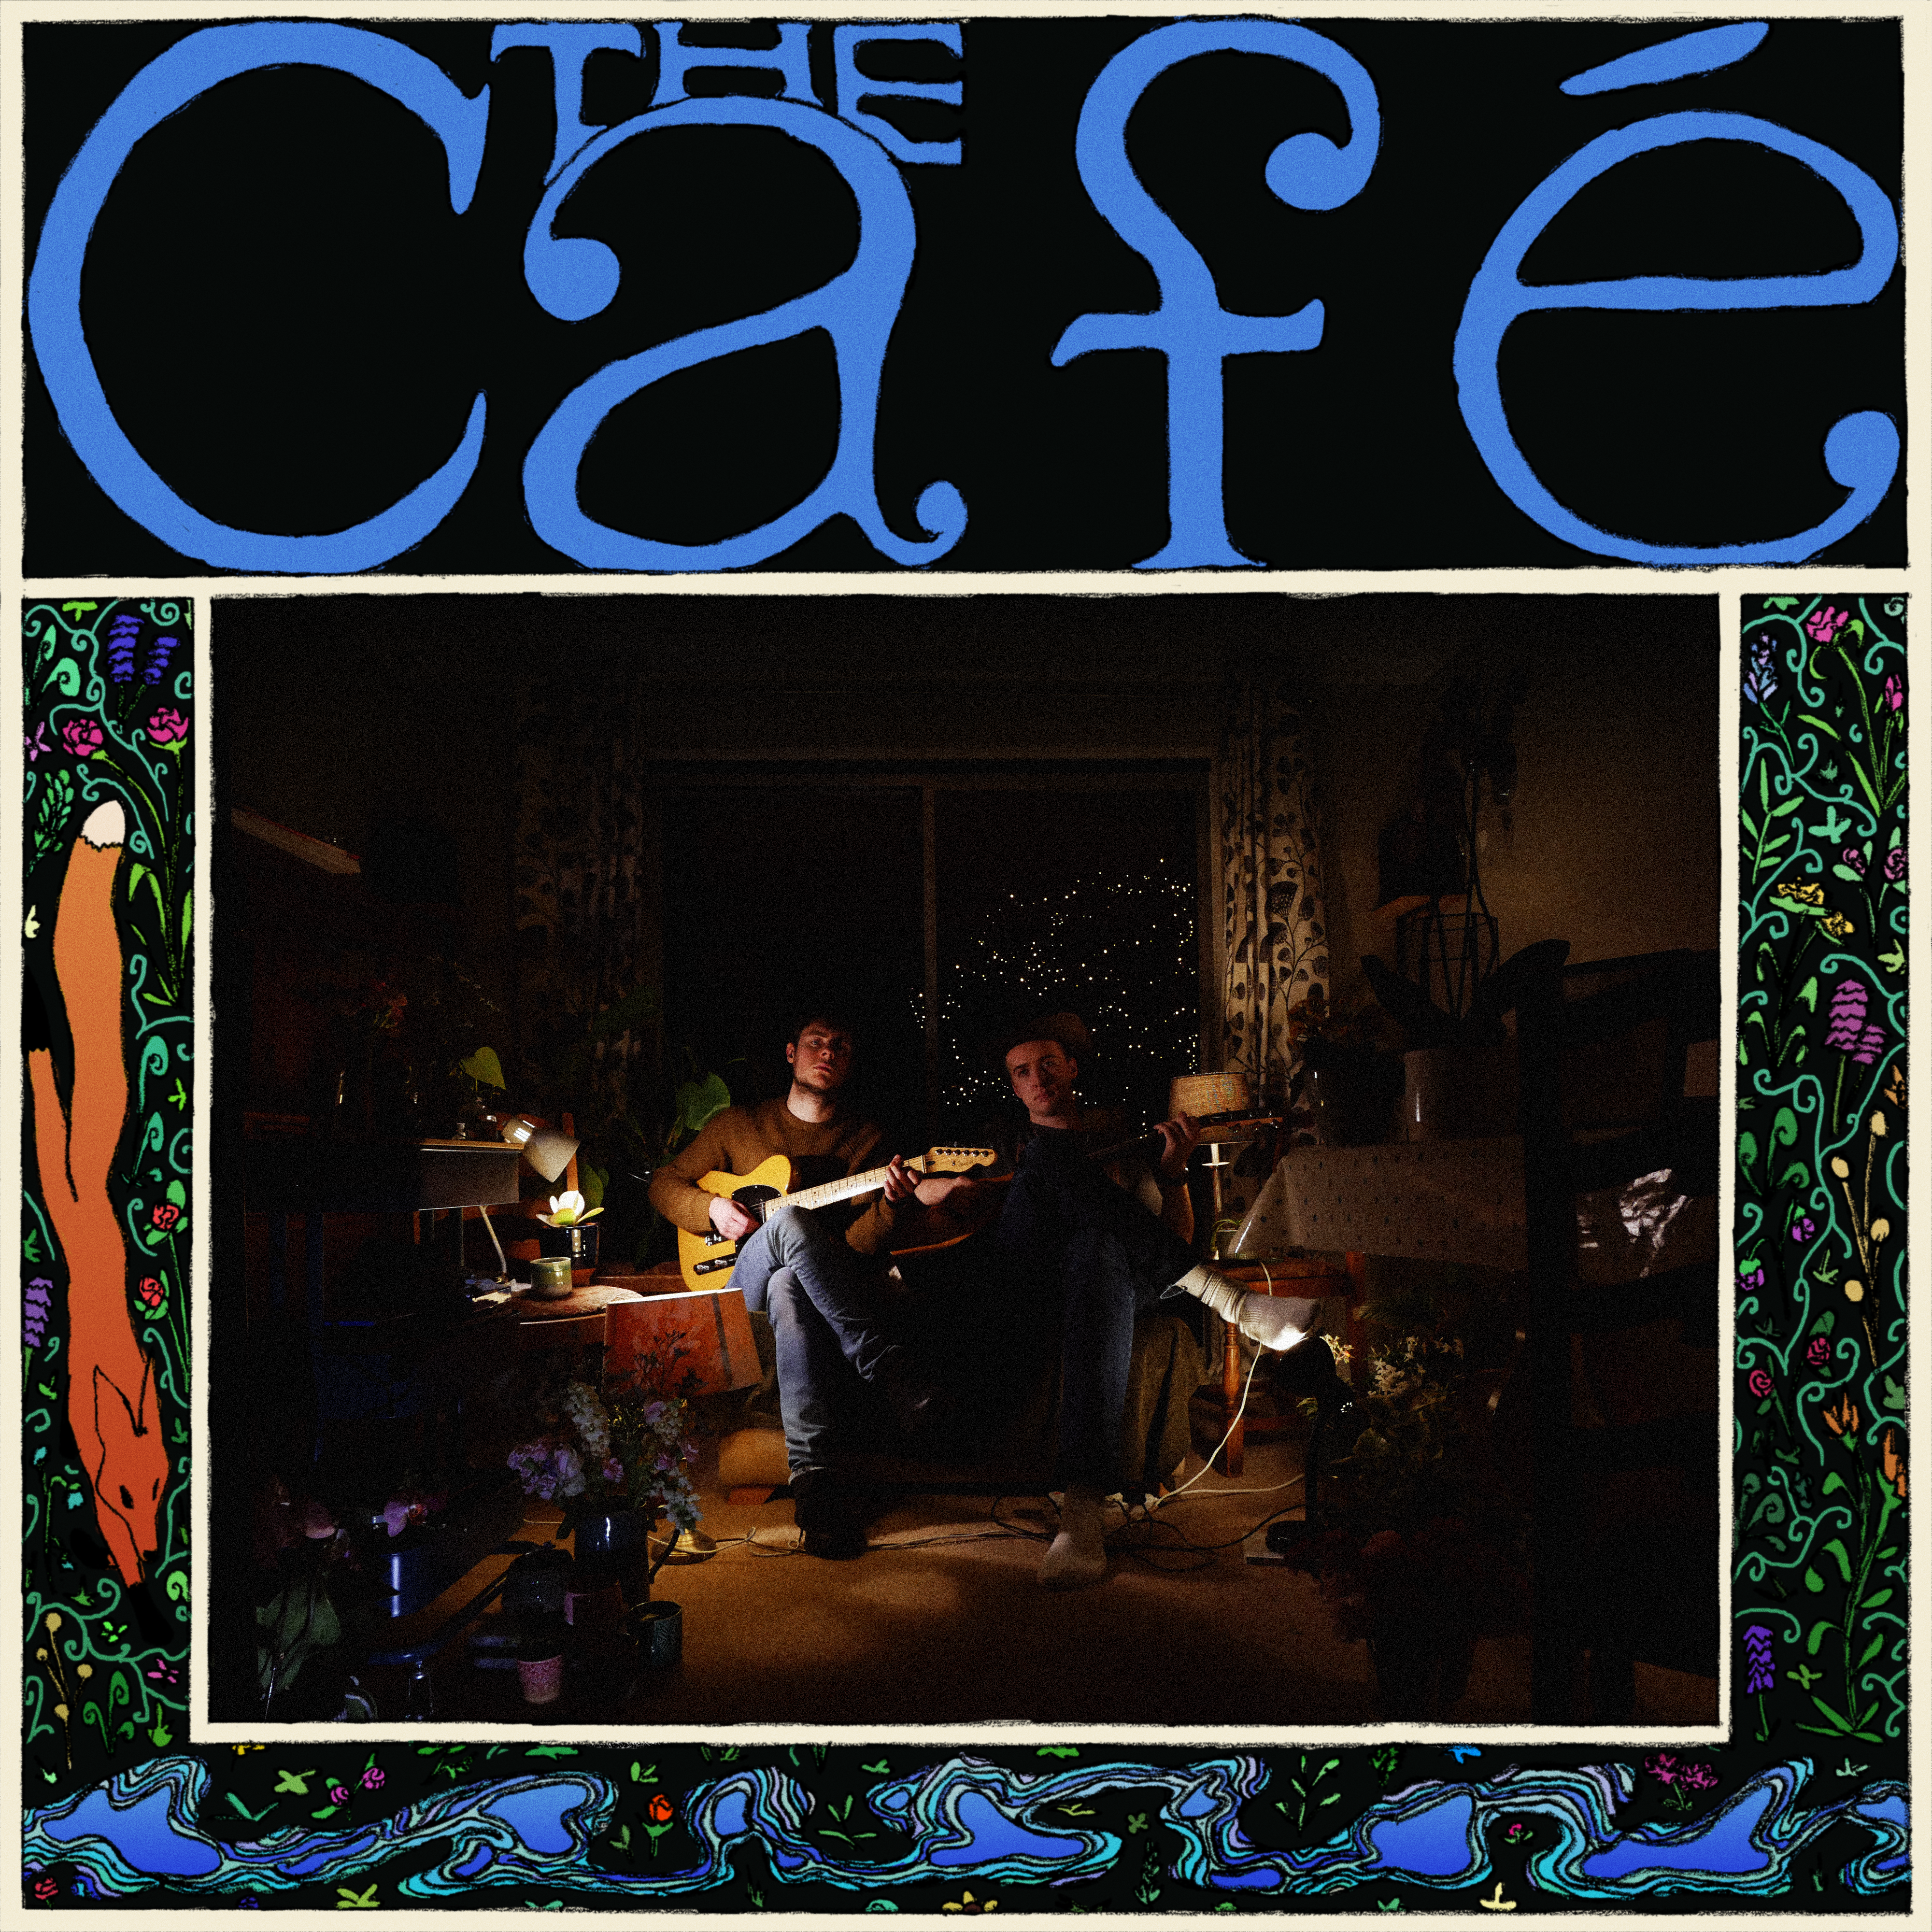 The cafe cover art